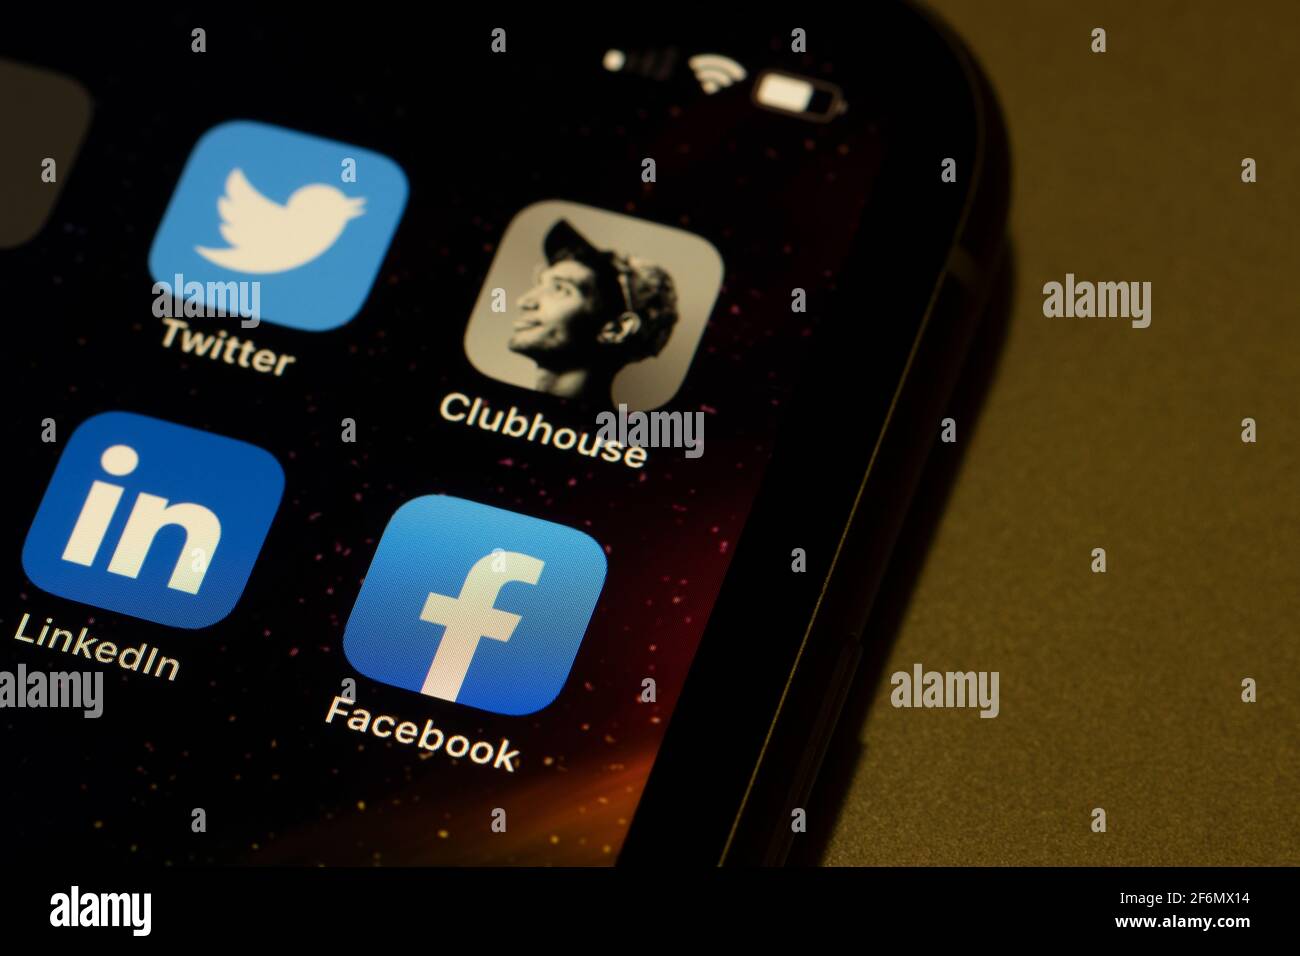 LinkedIn, FB, Twitter, Clubhouse apps seen on an iPhone. LinkedIn joins Twitter and Facebook in becoming another competitor of Clubhouse by testing... Stock Photo